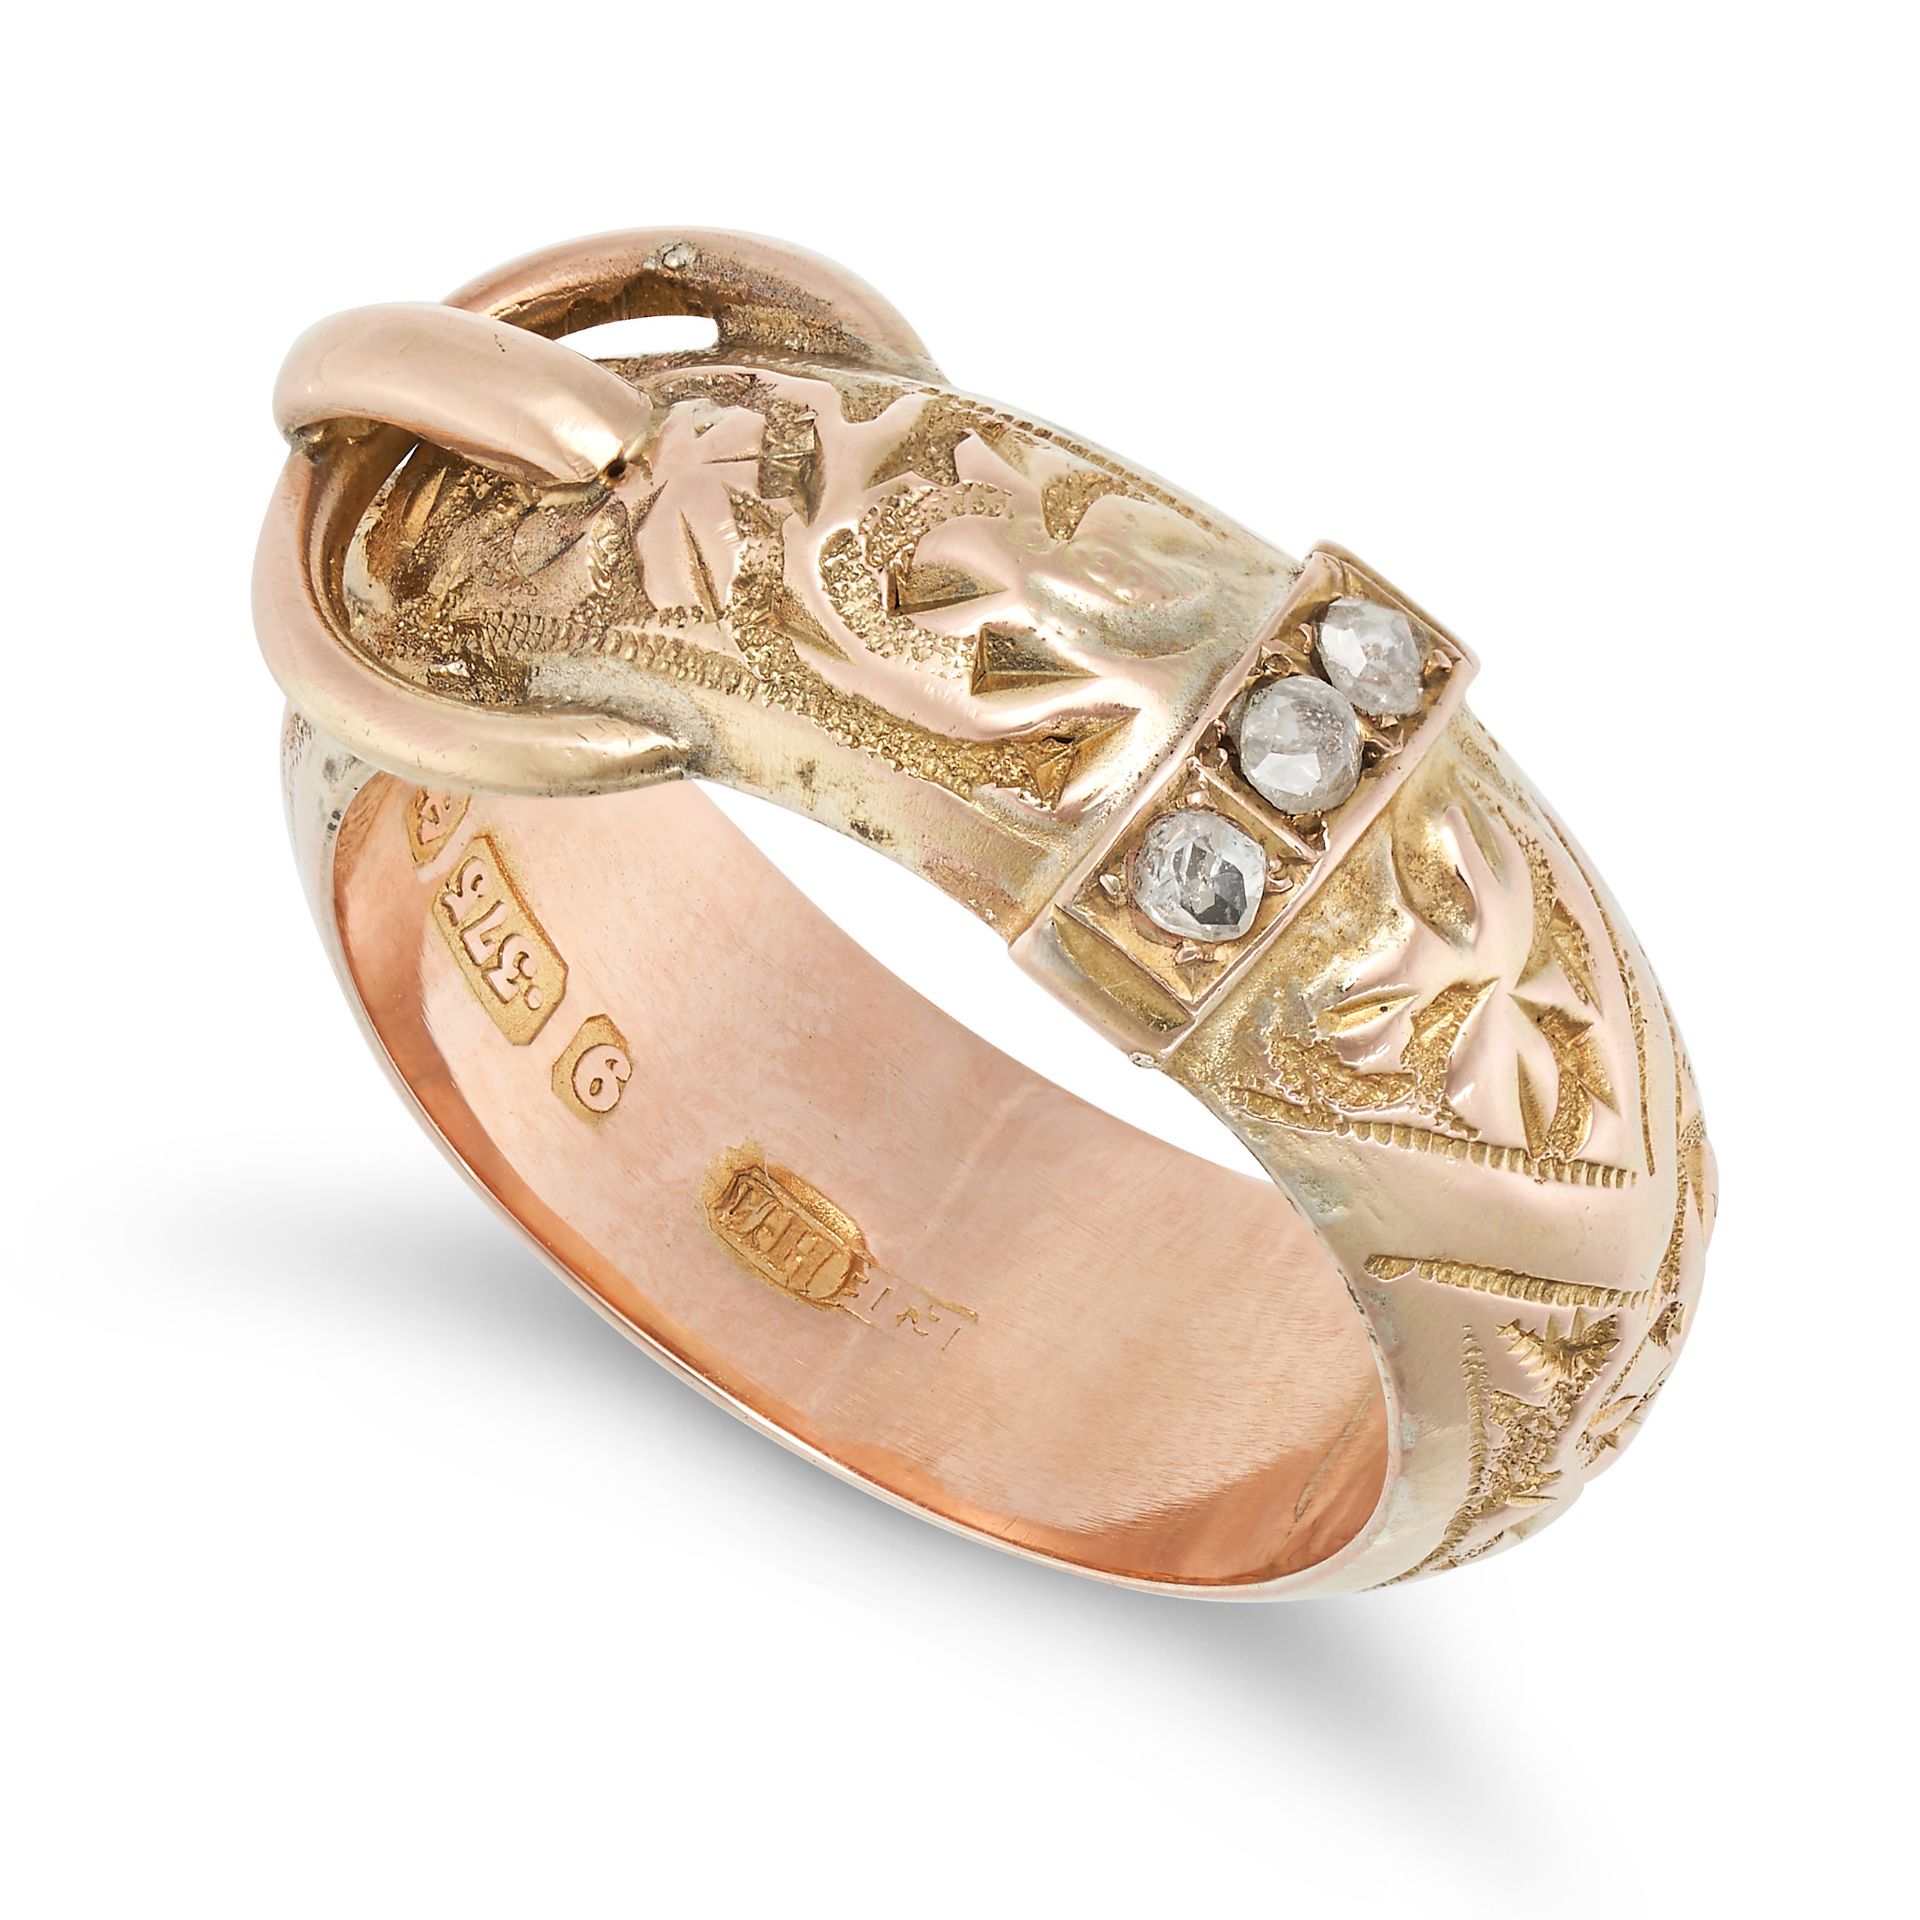 AN ANTIQUE DIAMOND BELT RING in 9ct yellow gold, designed as a belt accented by rose cut diamonds... - Image 2 of 2